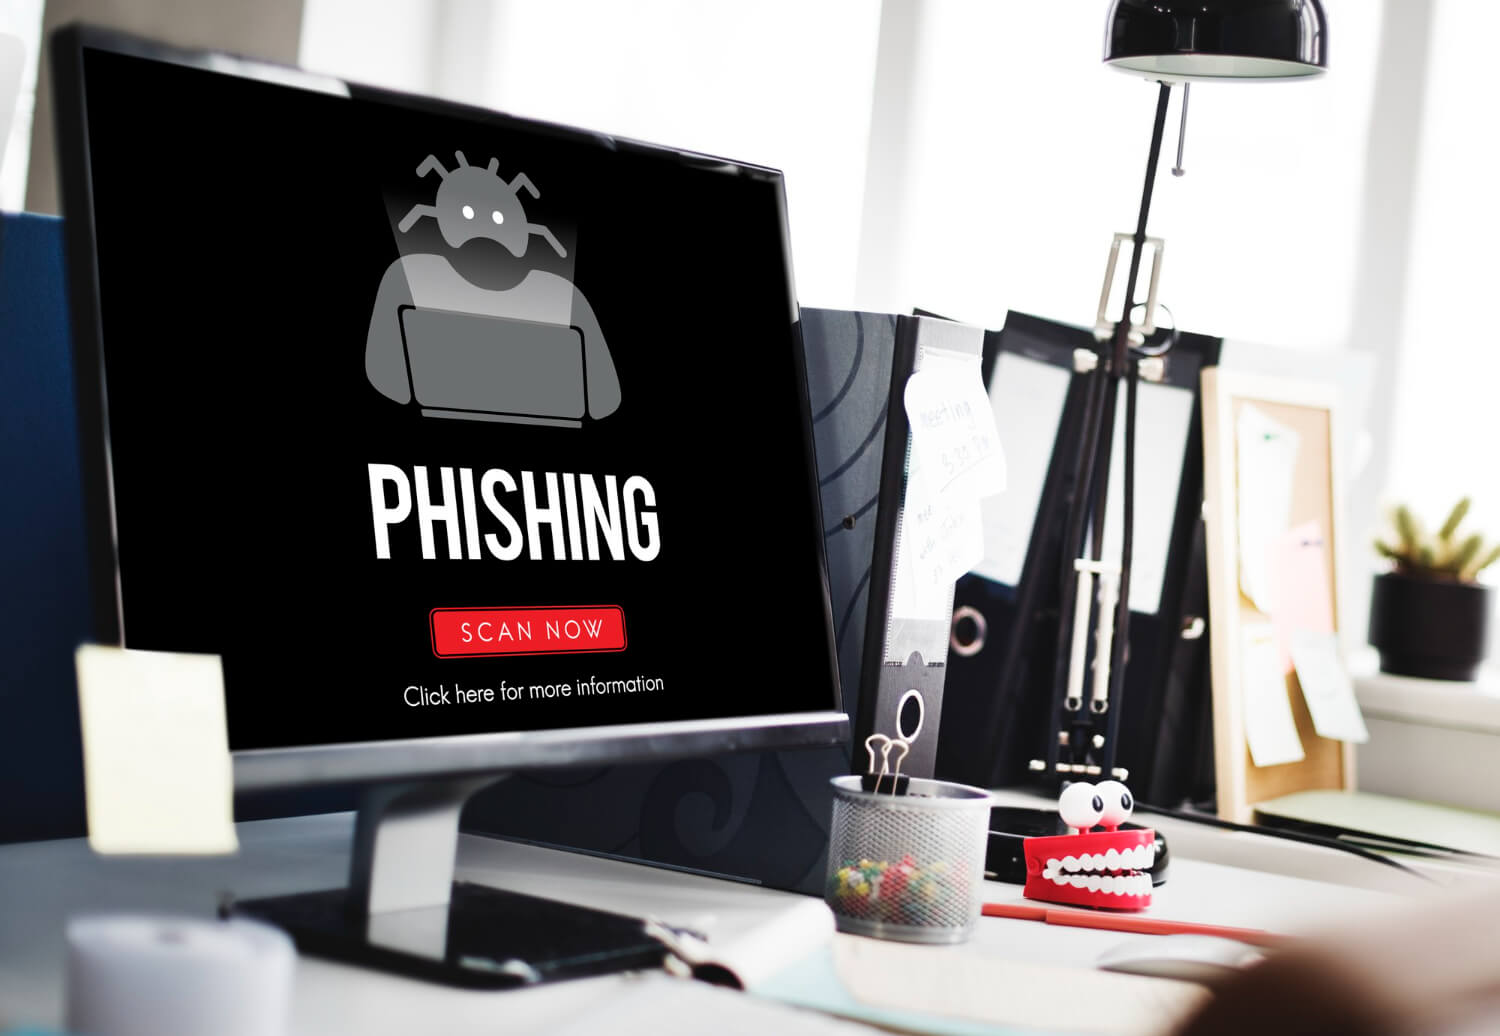 How can domain names be used in phishing attacks